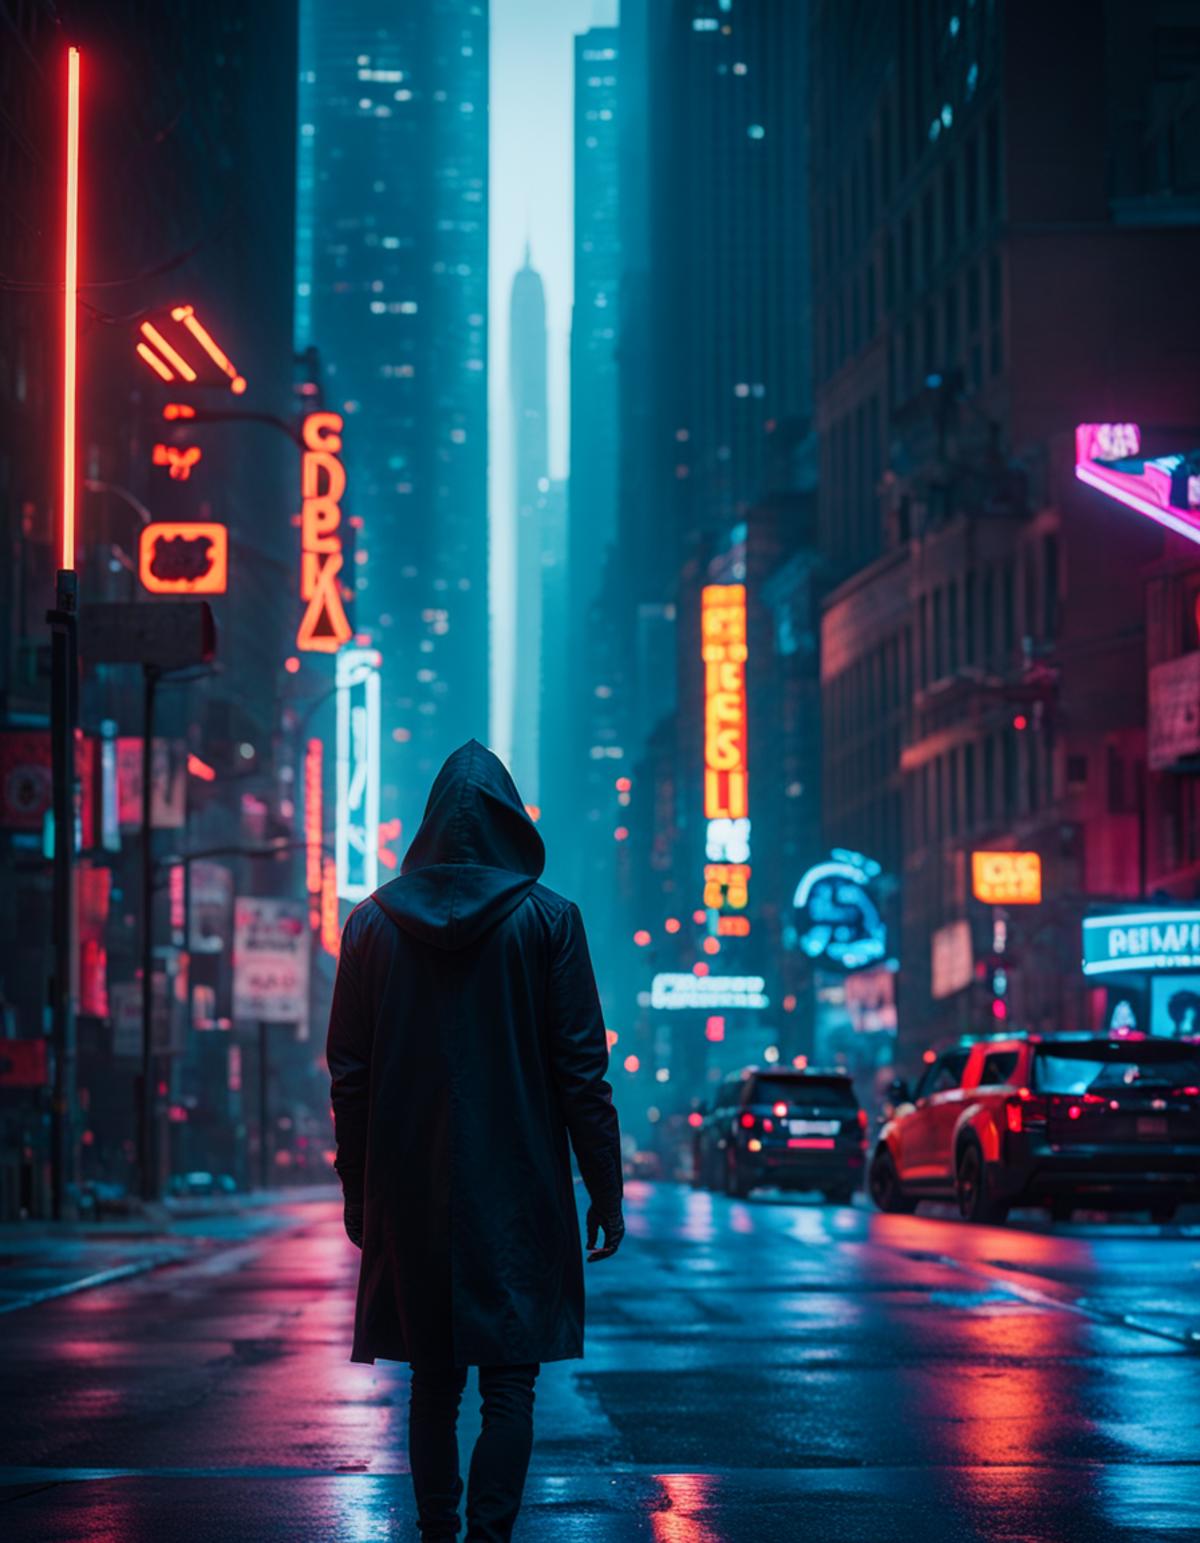 A hooded person standing on a city street with neon lights and a car in the background.